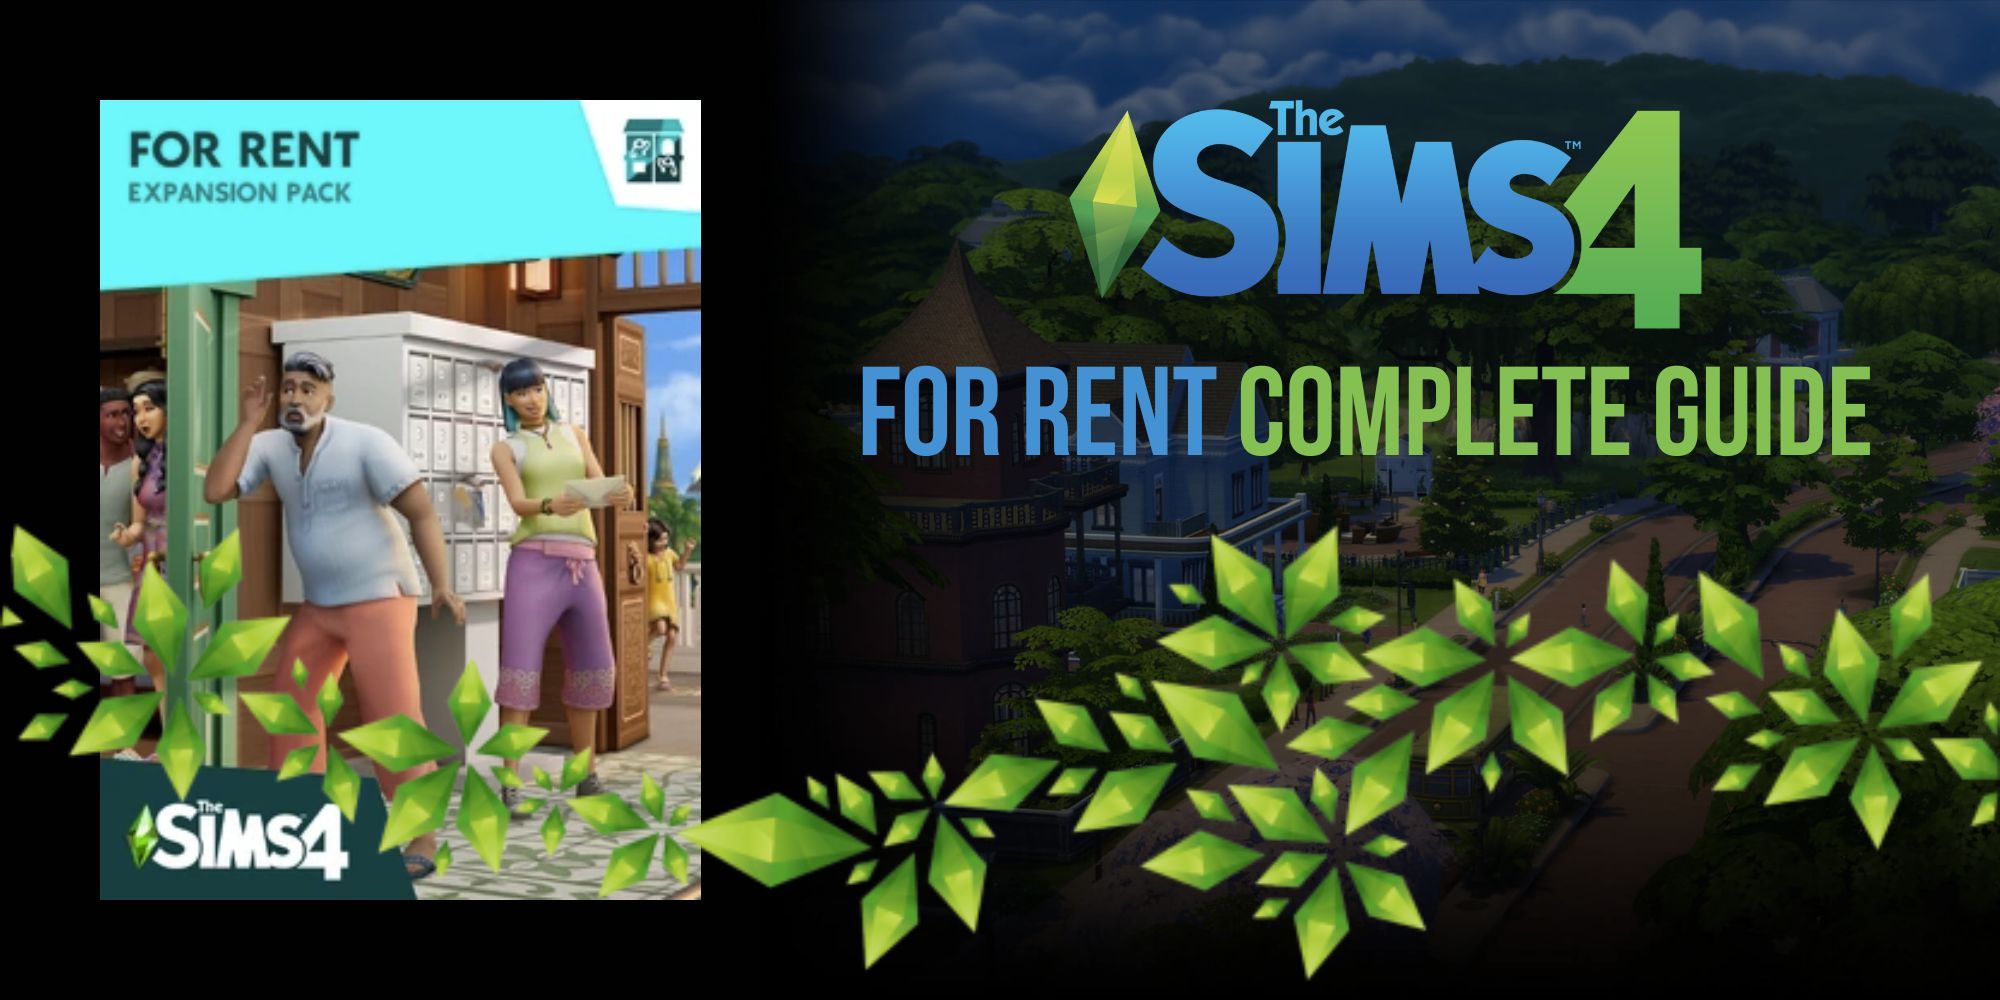 The Sims 4 For Rent Complete Guide